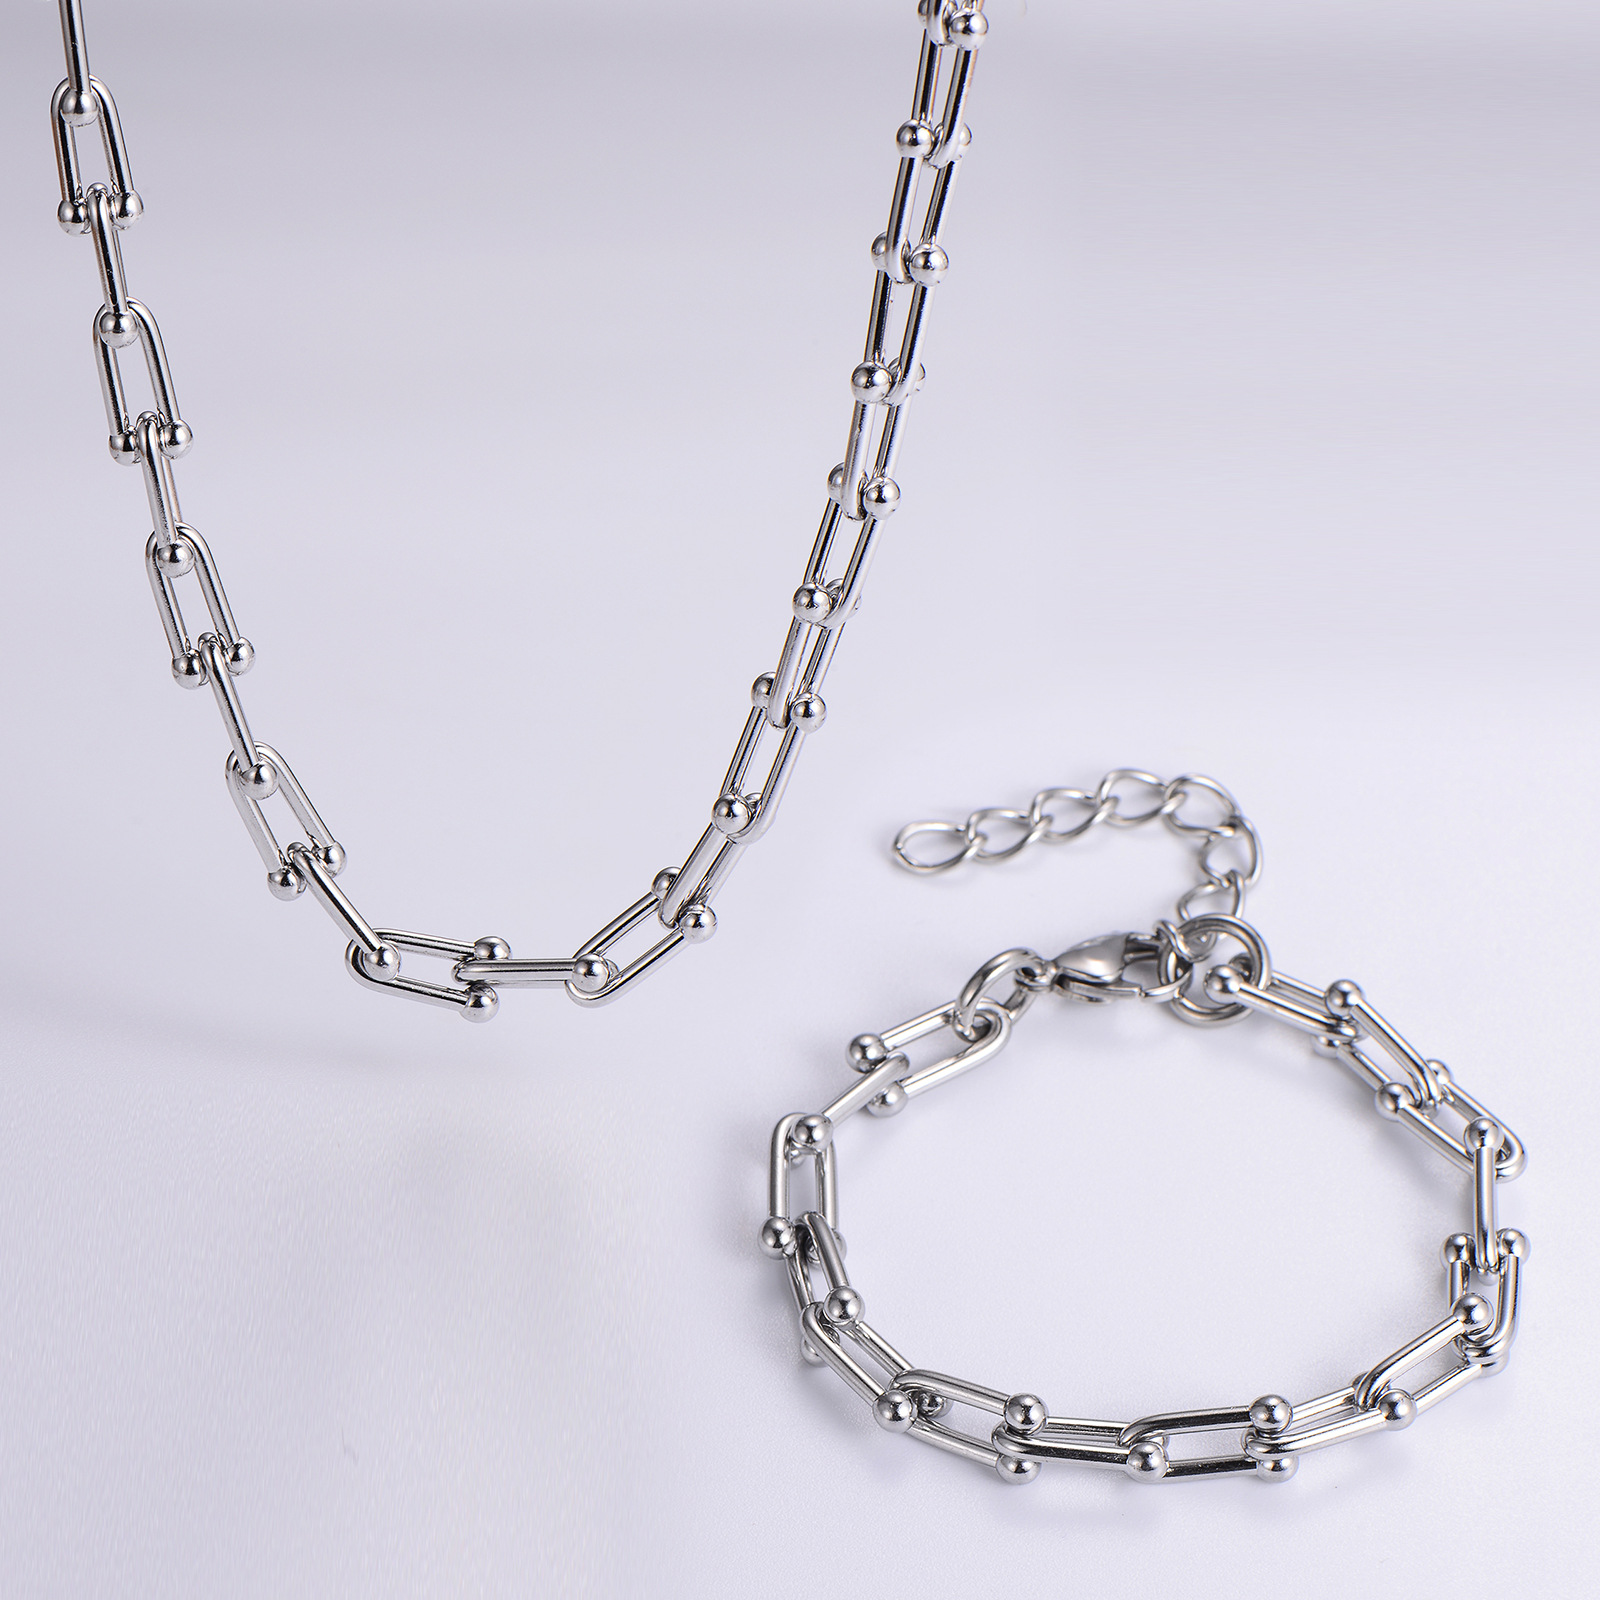 Steel bracelets and necklaces